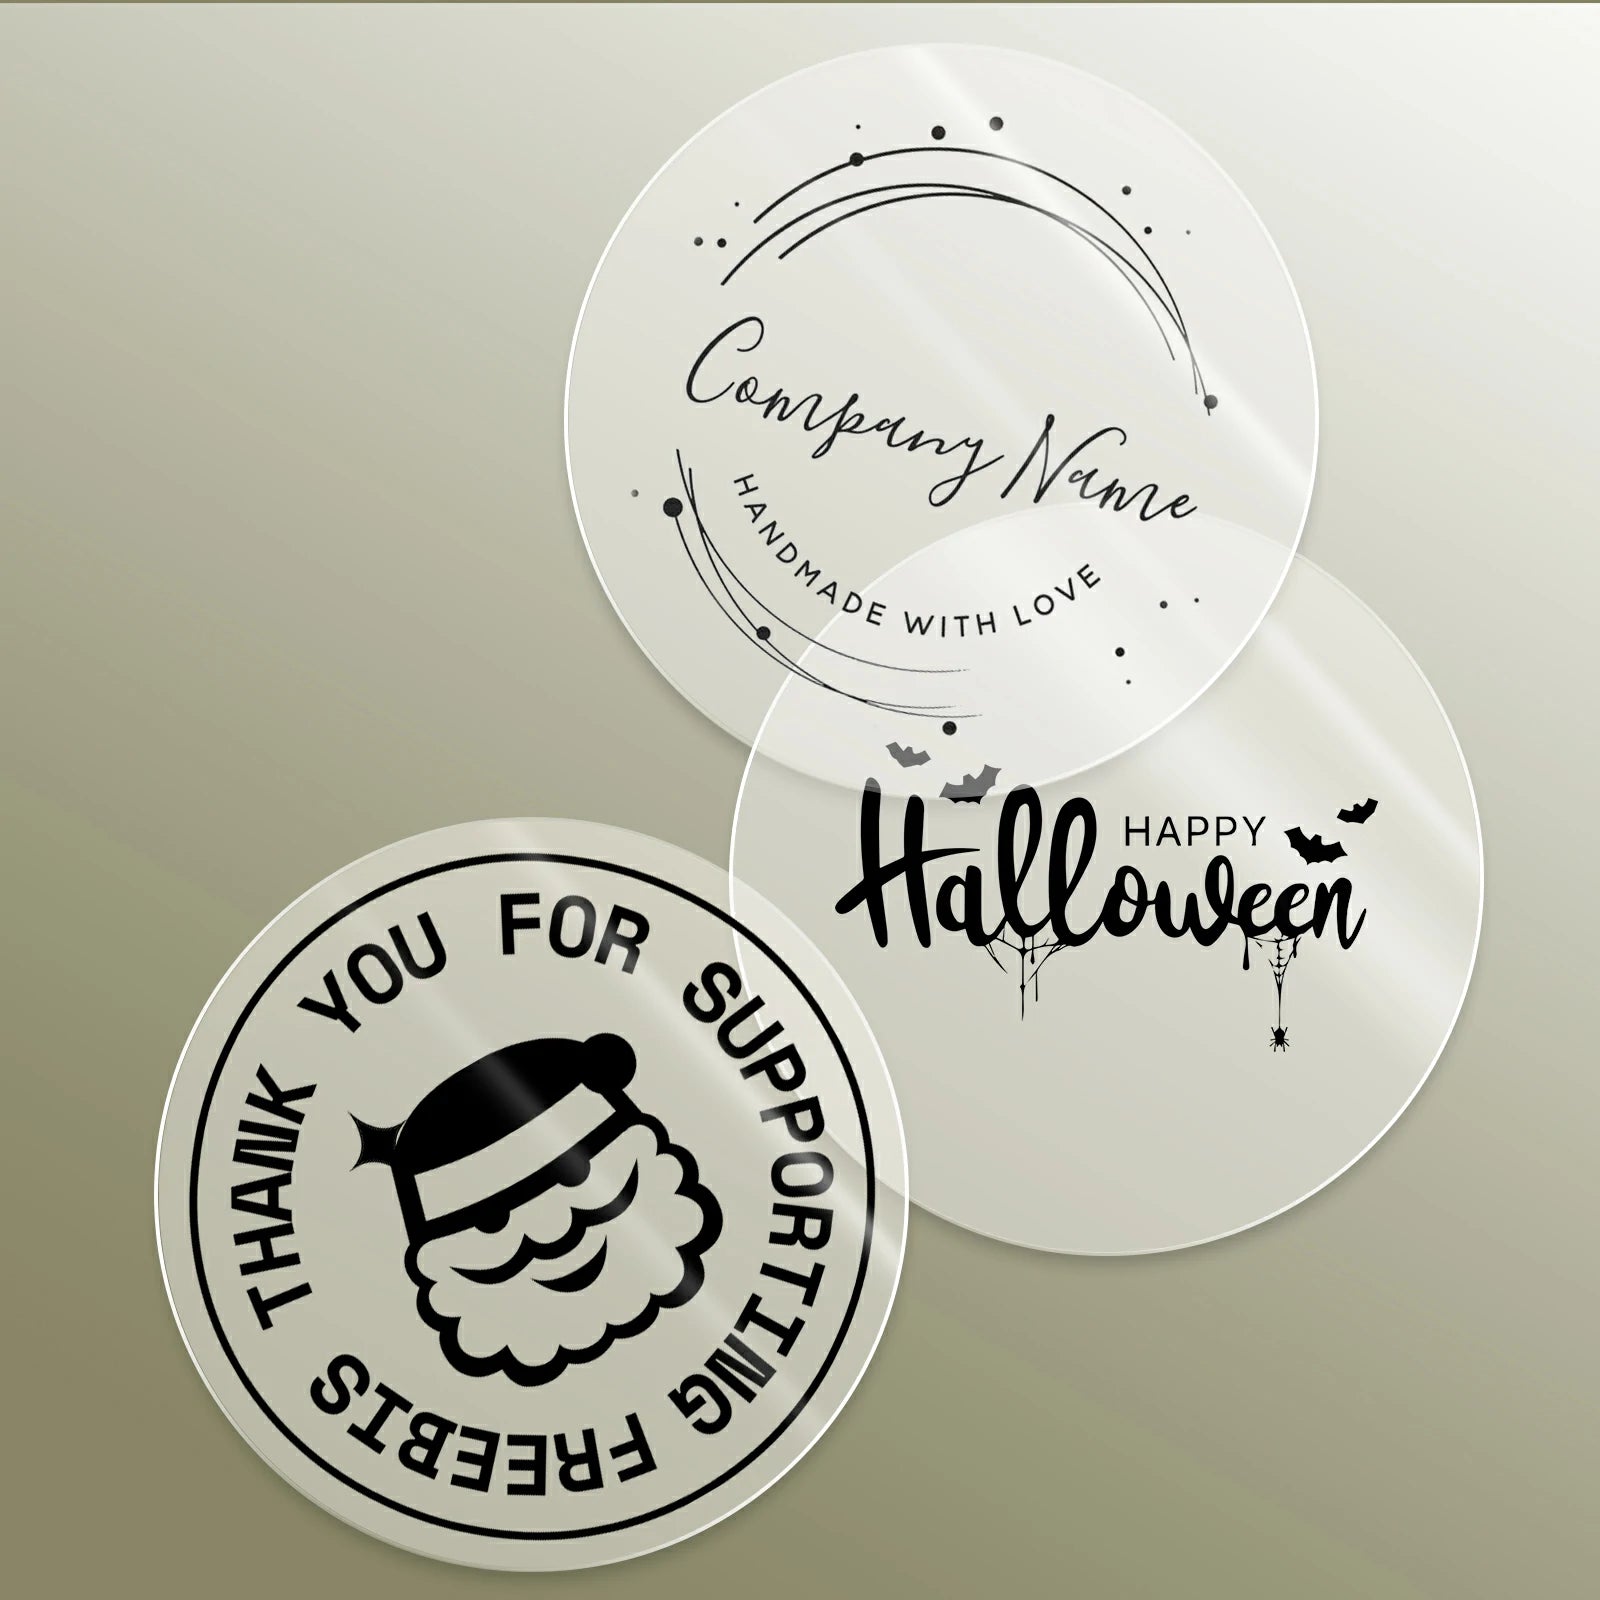 Halloween Glass Can Sticker Label Packaging Thermal Printer